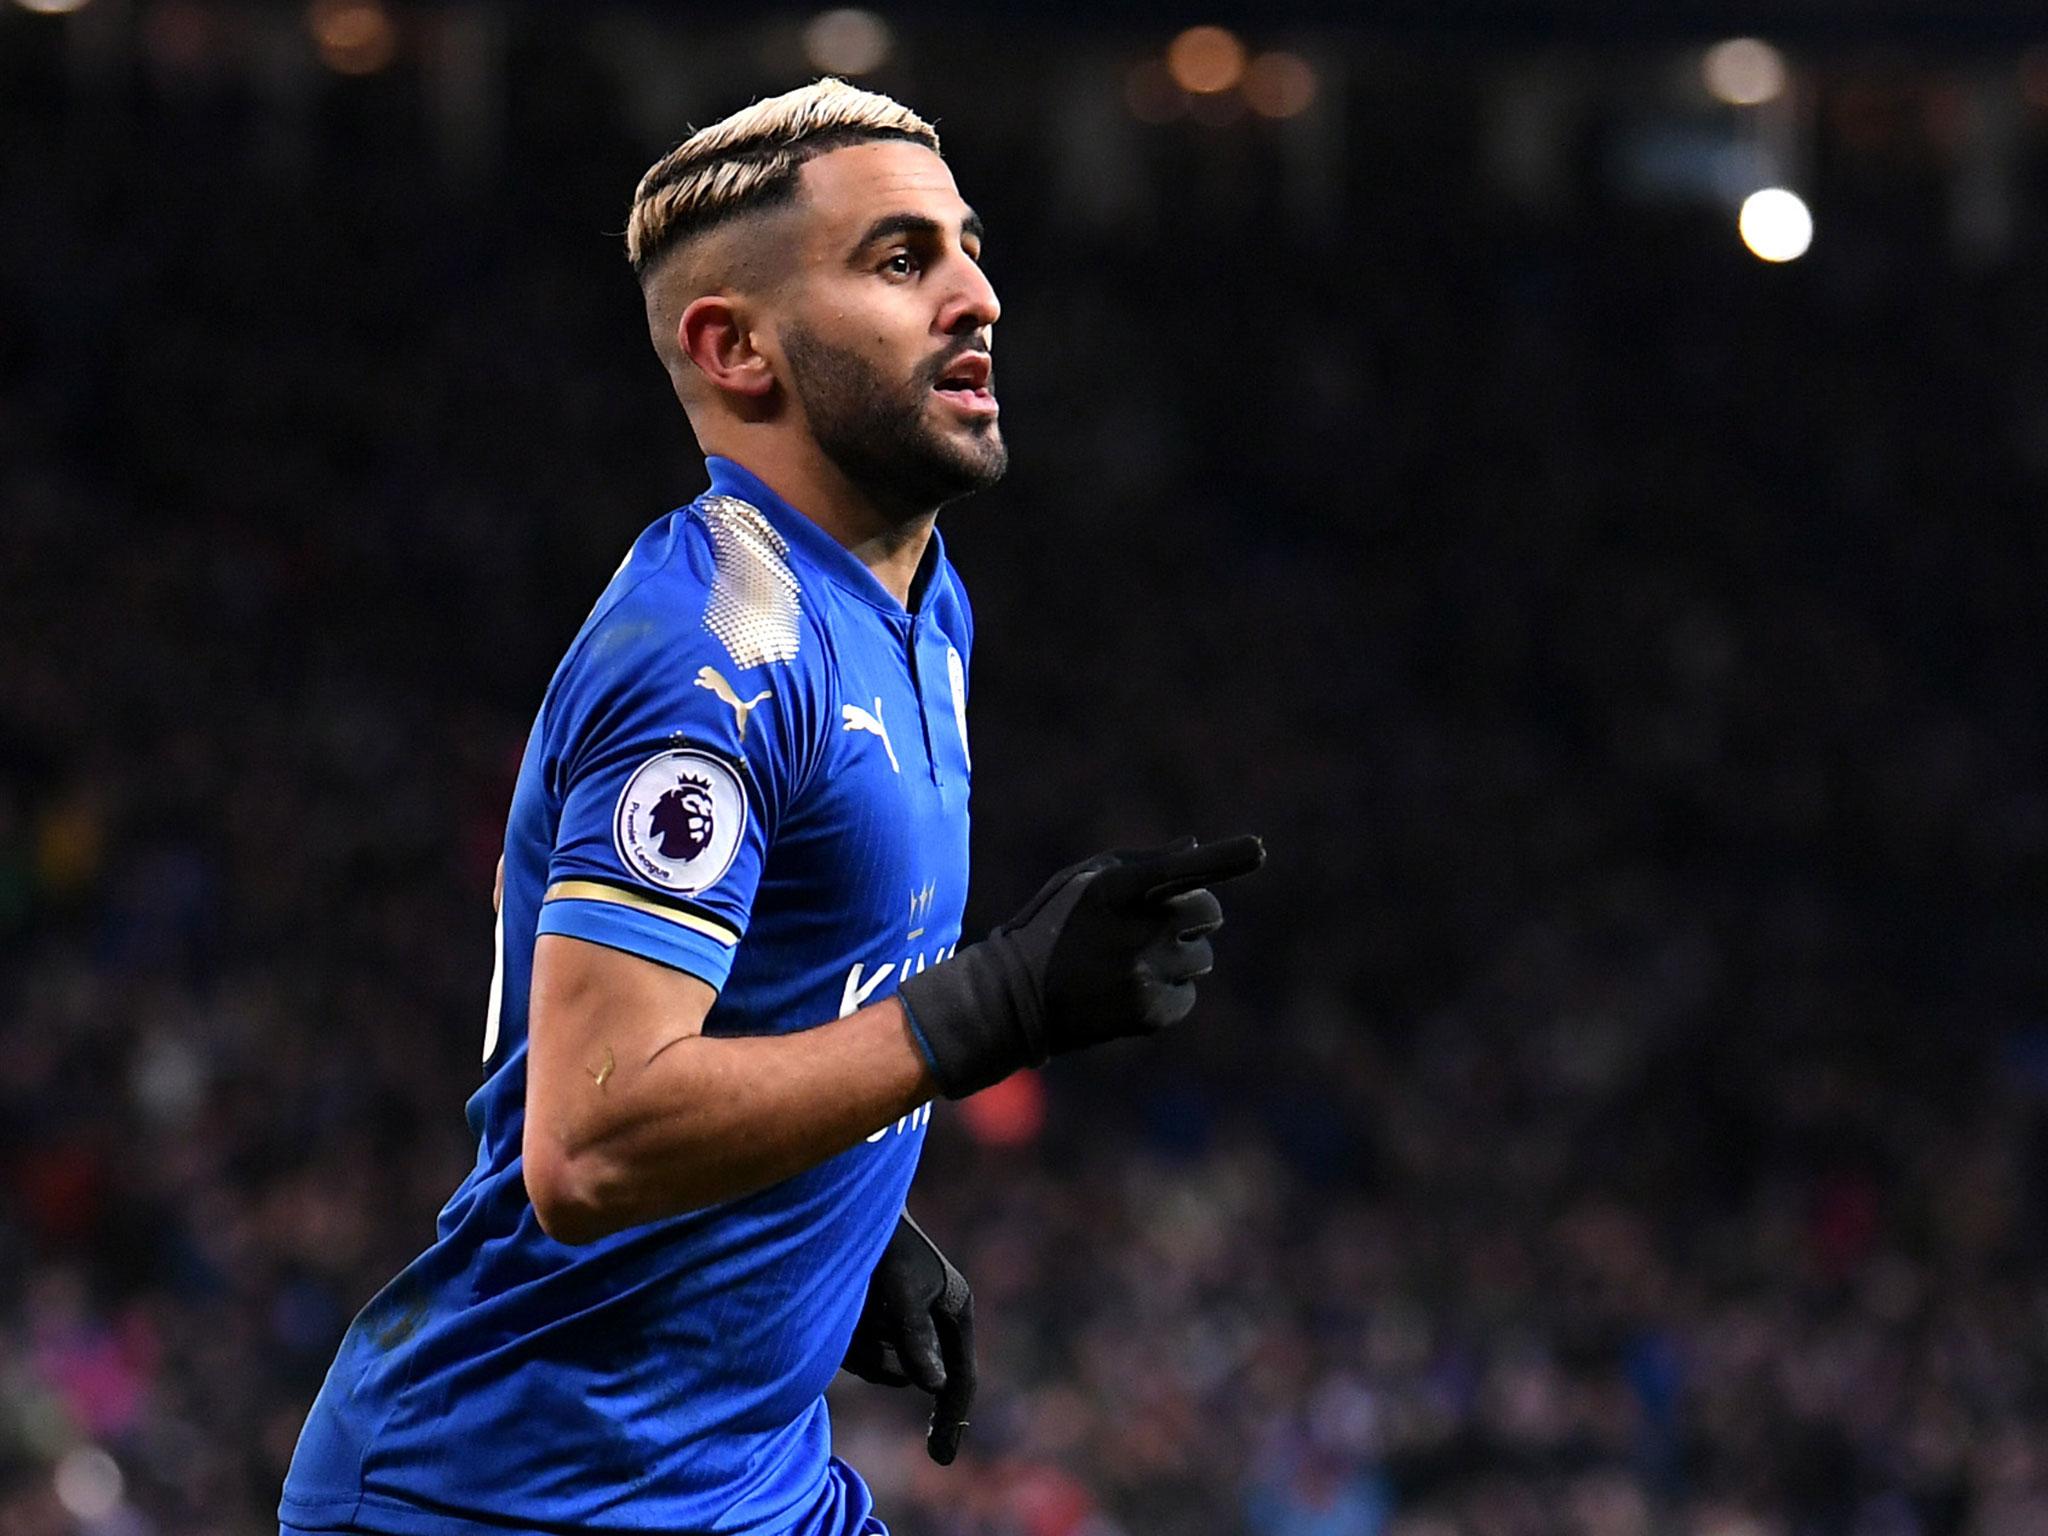 Riyad Mahrez to miss third consecutive match for Leicester amid ongoing dispute, Claude Puel confirms